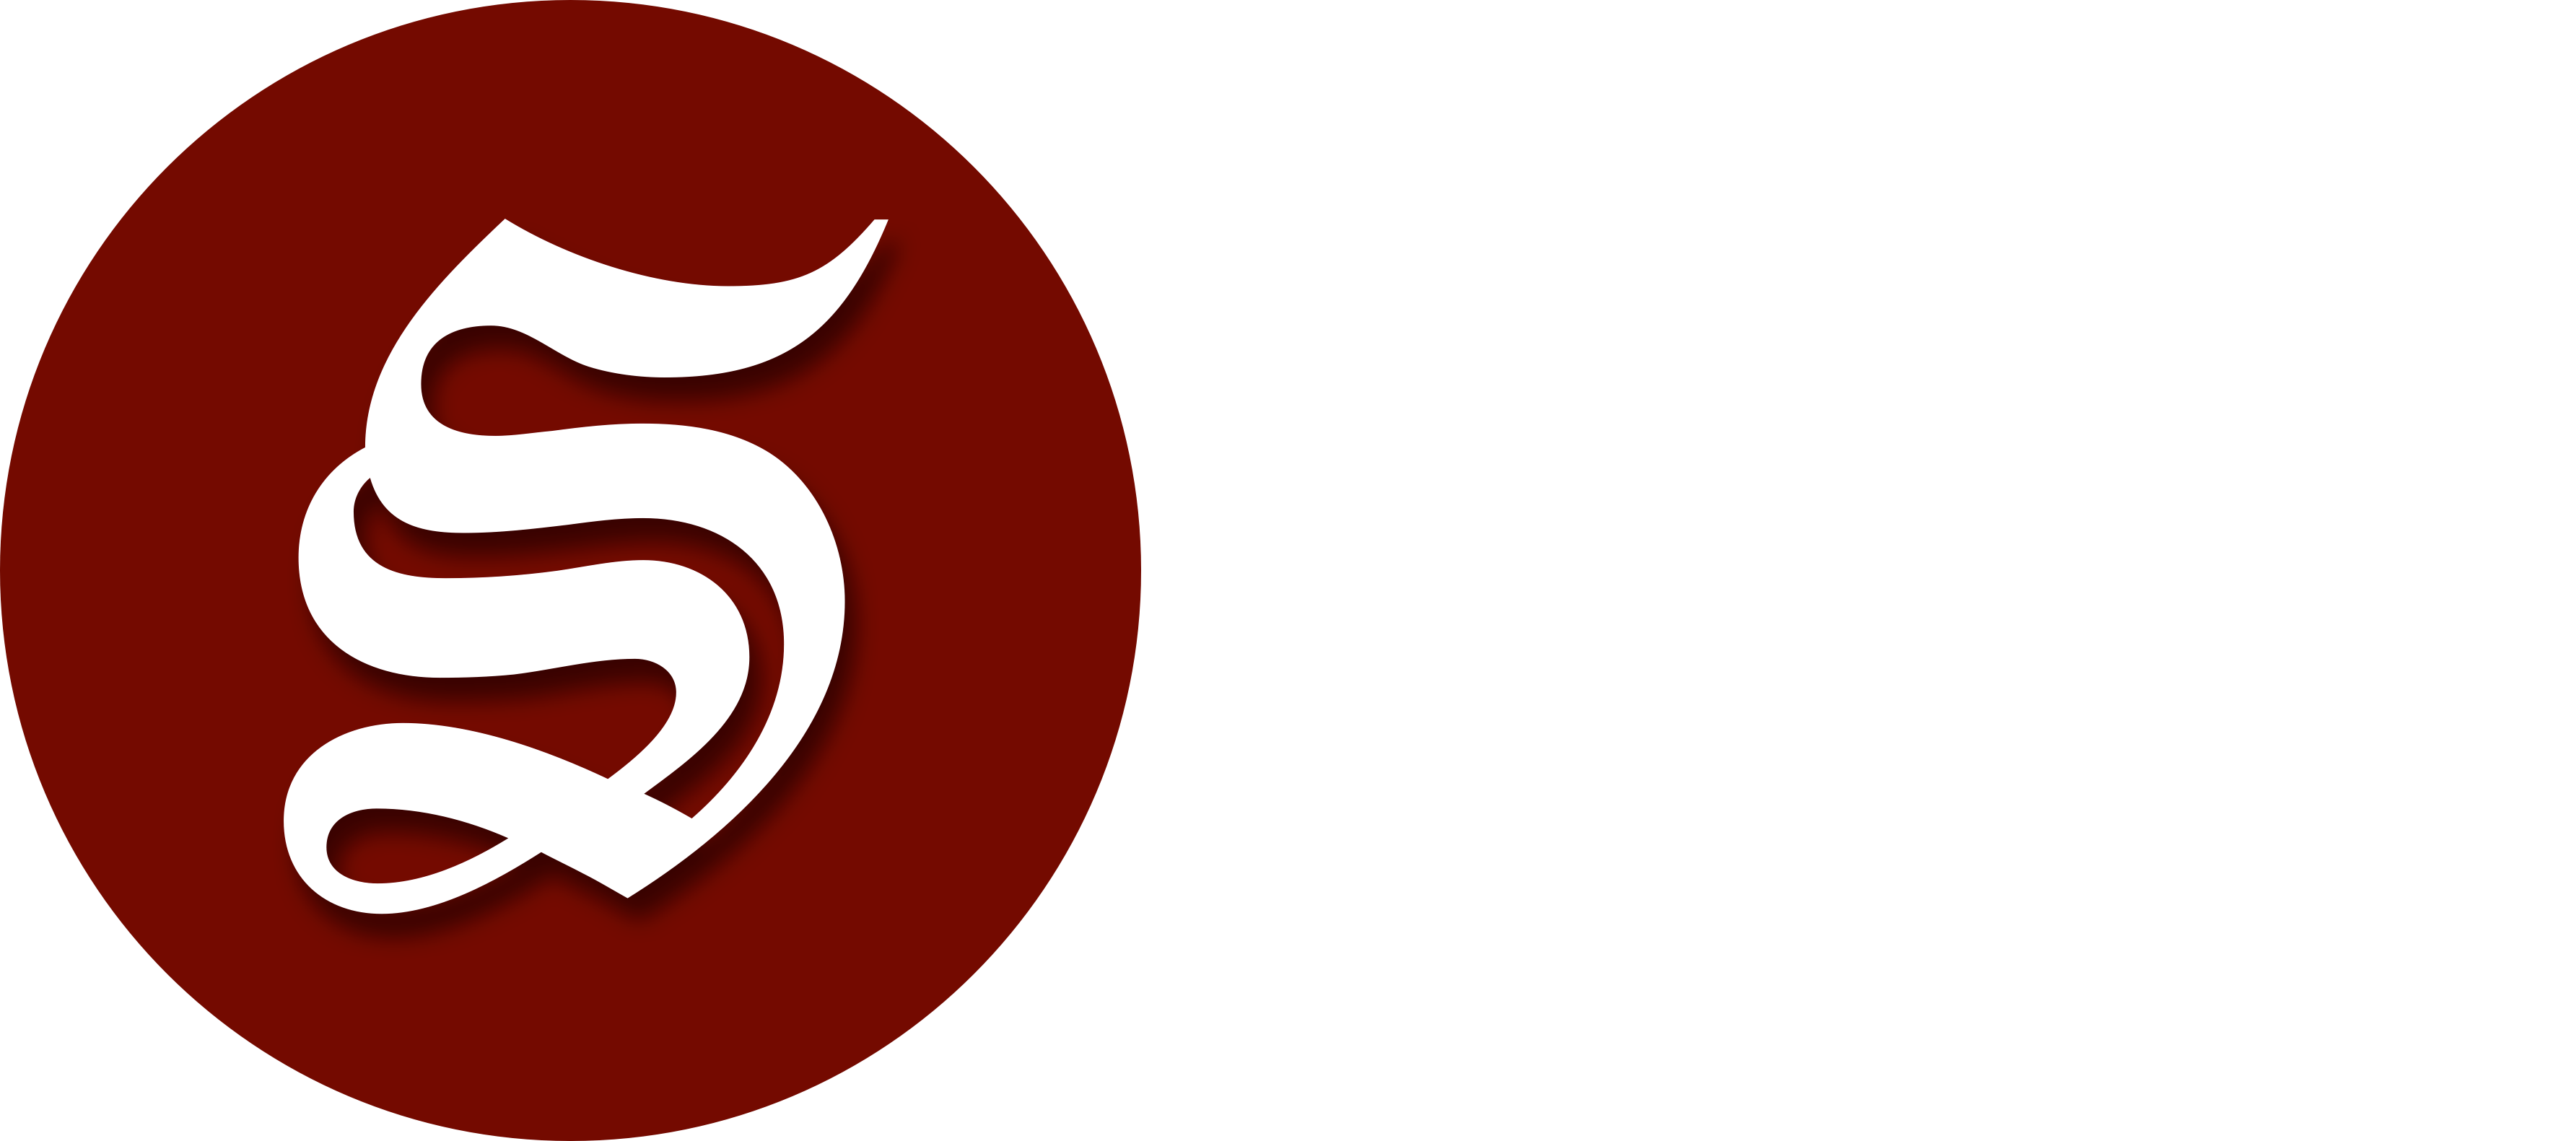 Red and White S Logo - Sunspots – Brought to you by The Cornell Daily Sun